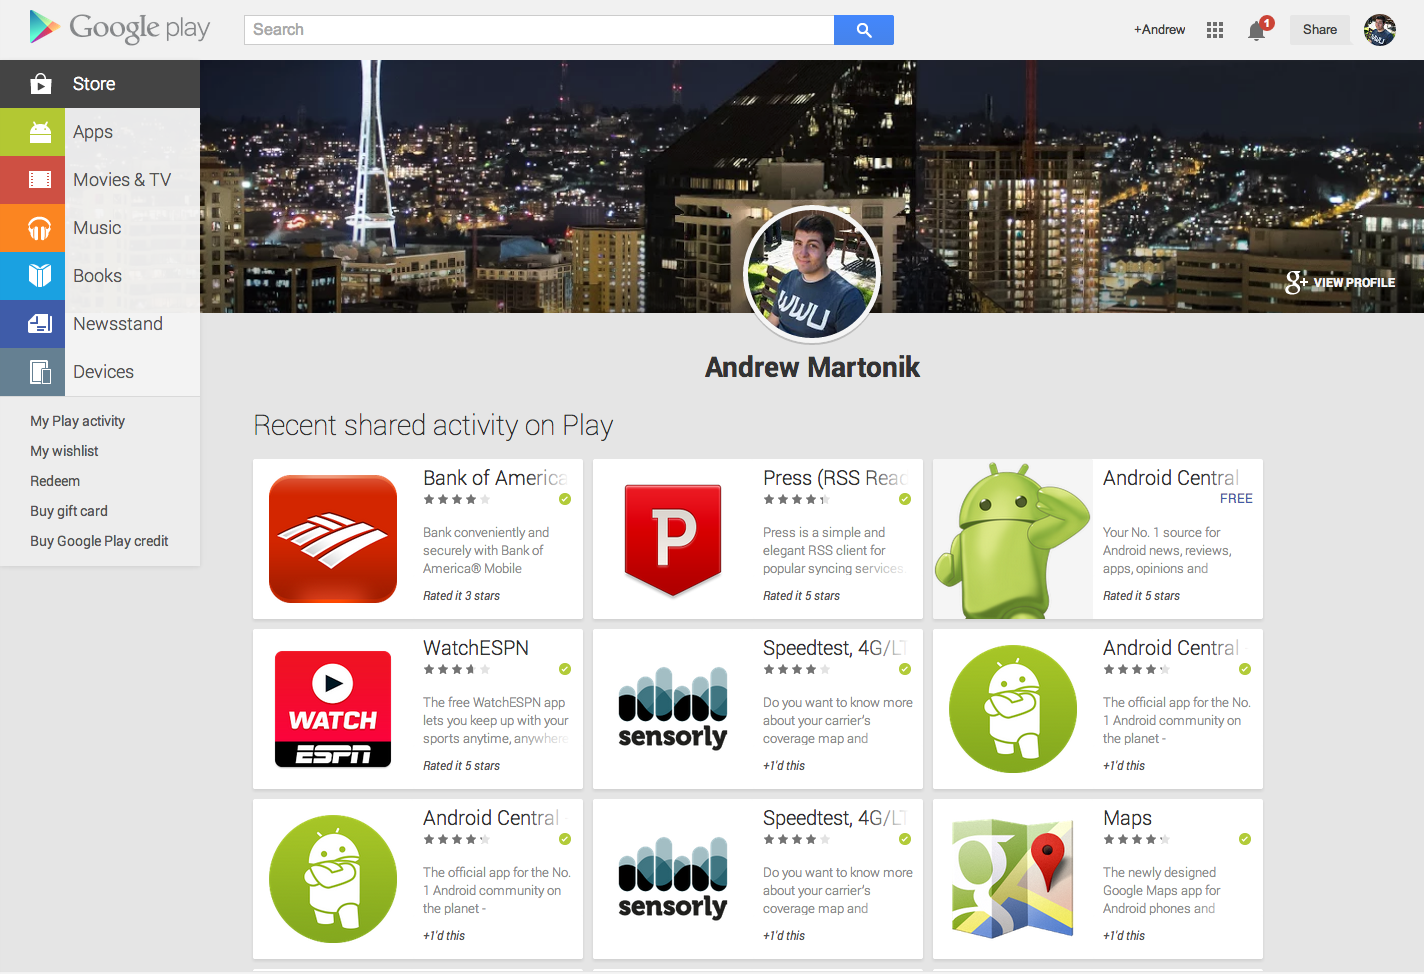 Google Play Activity page